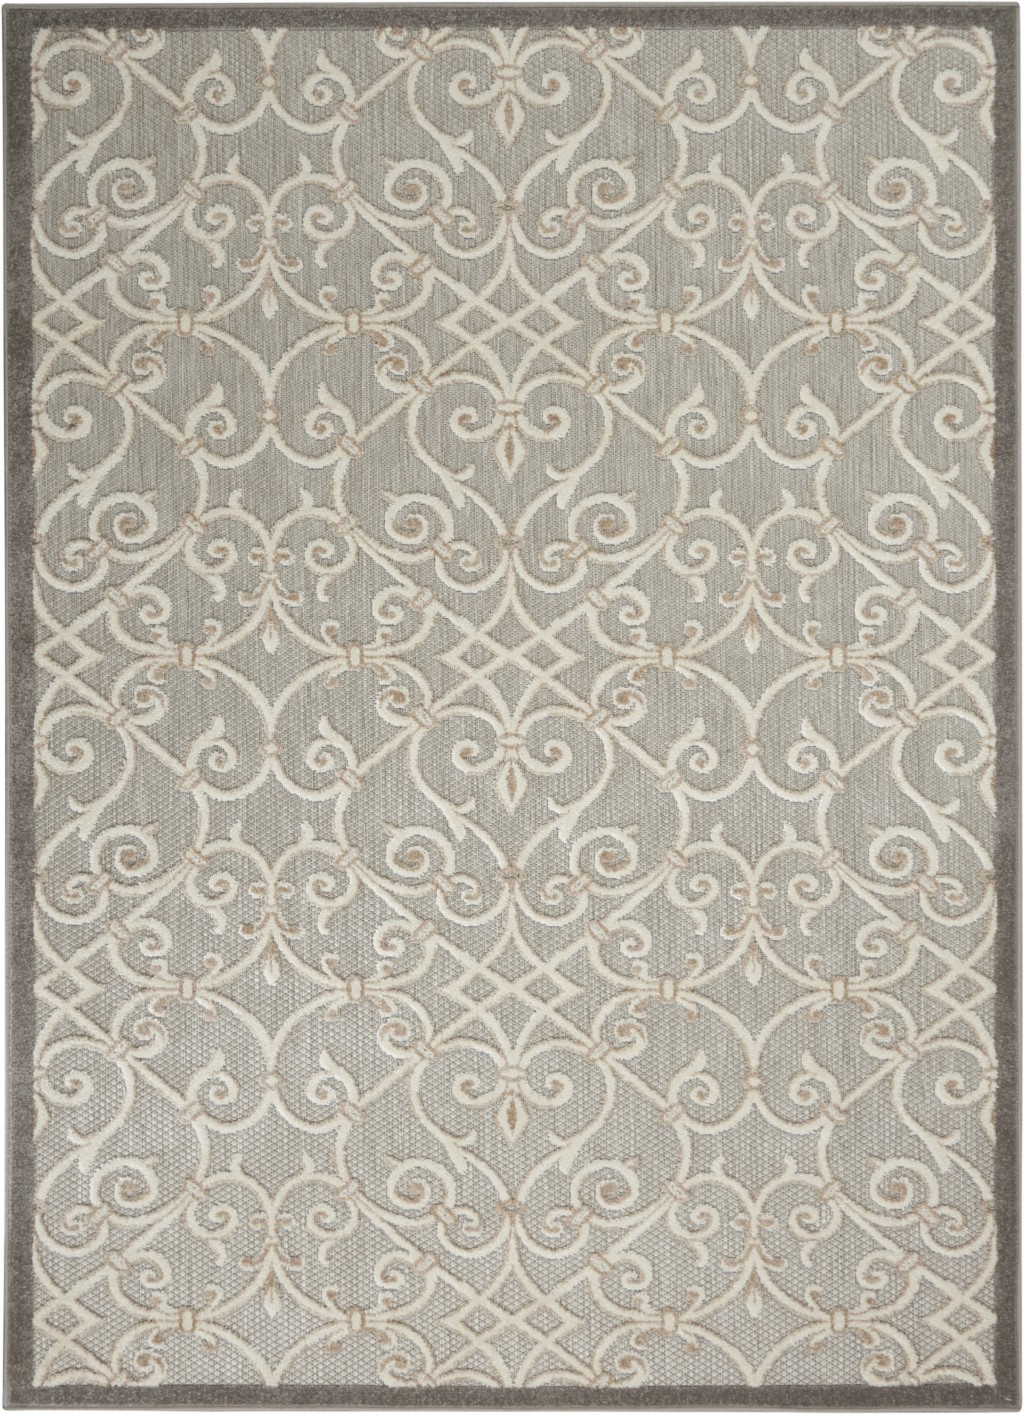 5' X 8' Gray And Ivory Floral Indoor Outdoor Area Rug-385052-1